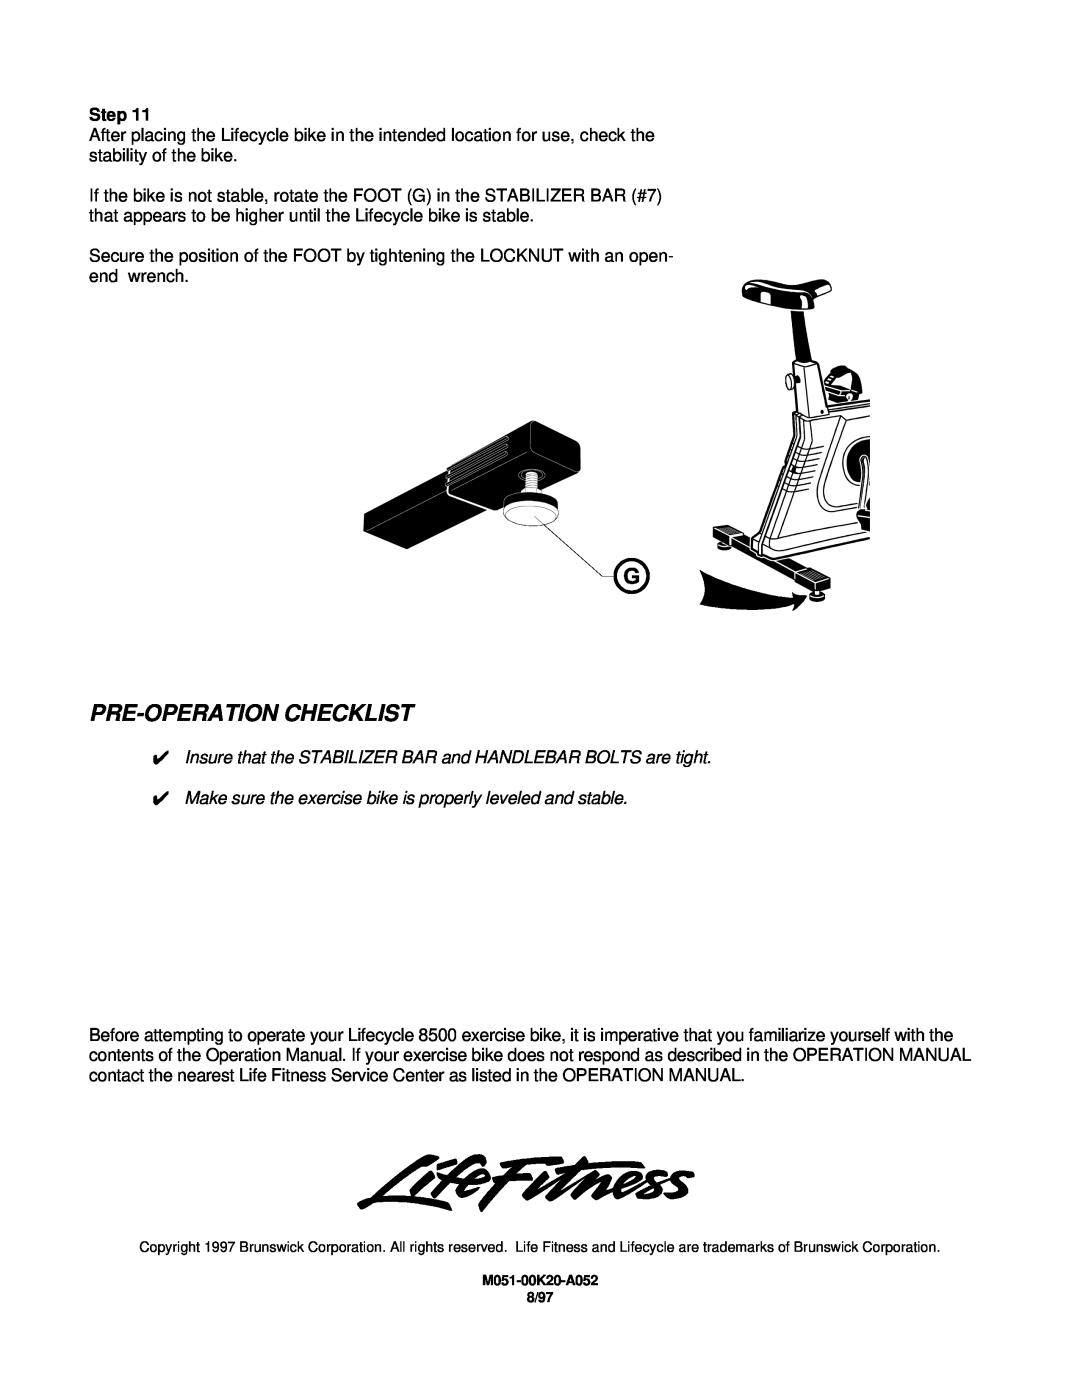 Life Fitness Lifecycle 8500 Pre-Operation Checklist, Insure that the STABILIZER BAR and HANDLEBAR BOLTS are tight 